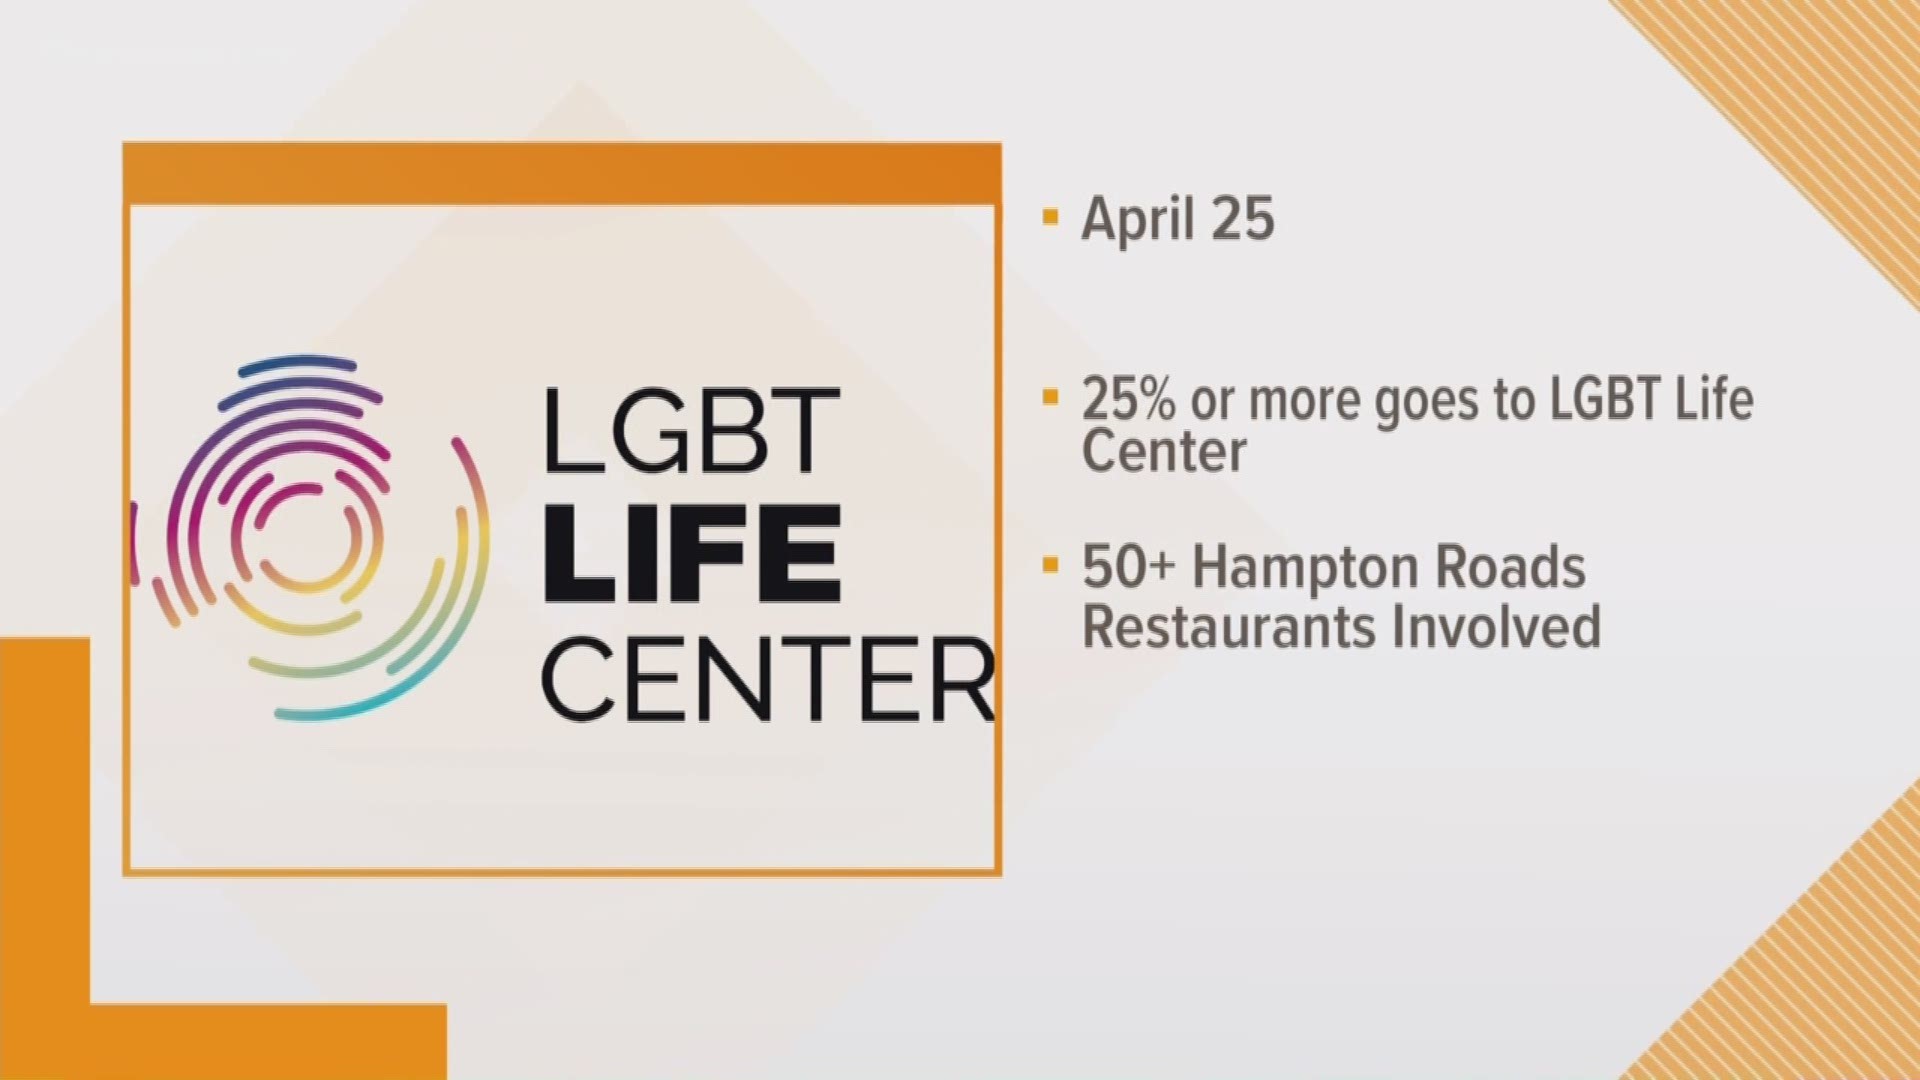 The 16th Annual Dining Out For Life Hampton Roads is happening April 25.